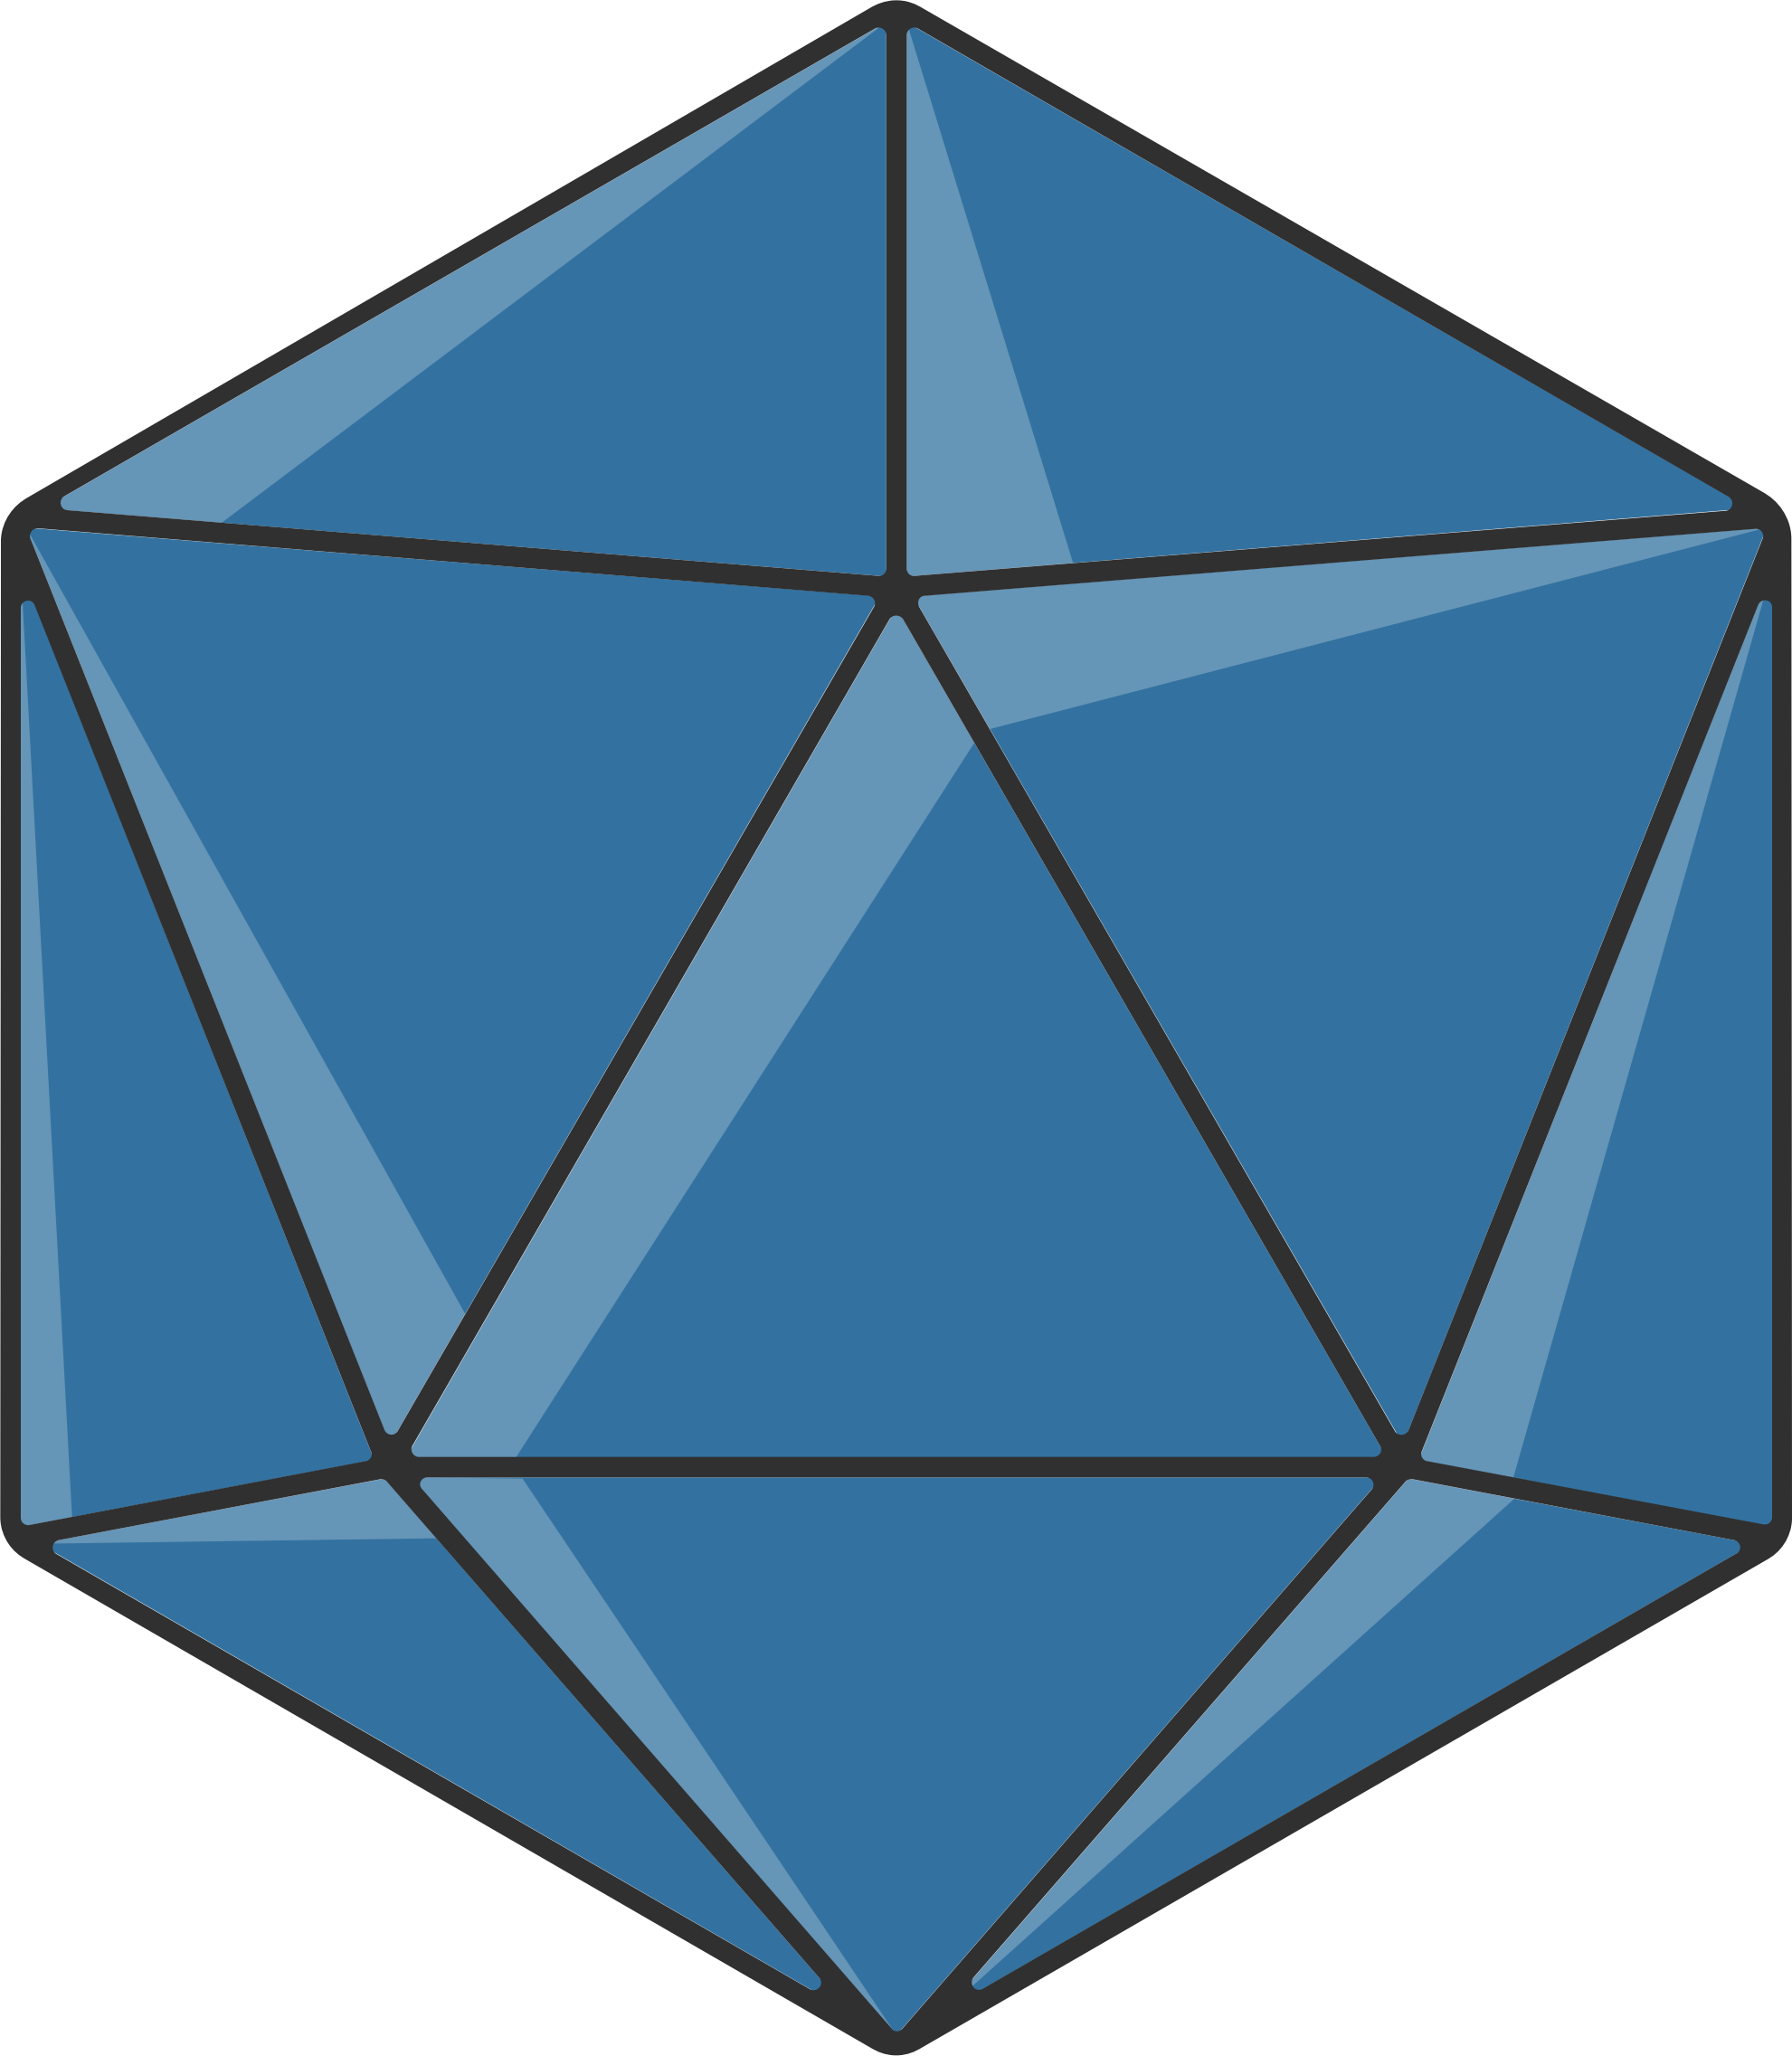 Big Image - 20 Sided Dice Png (1981x2273)